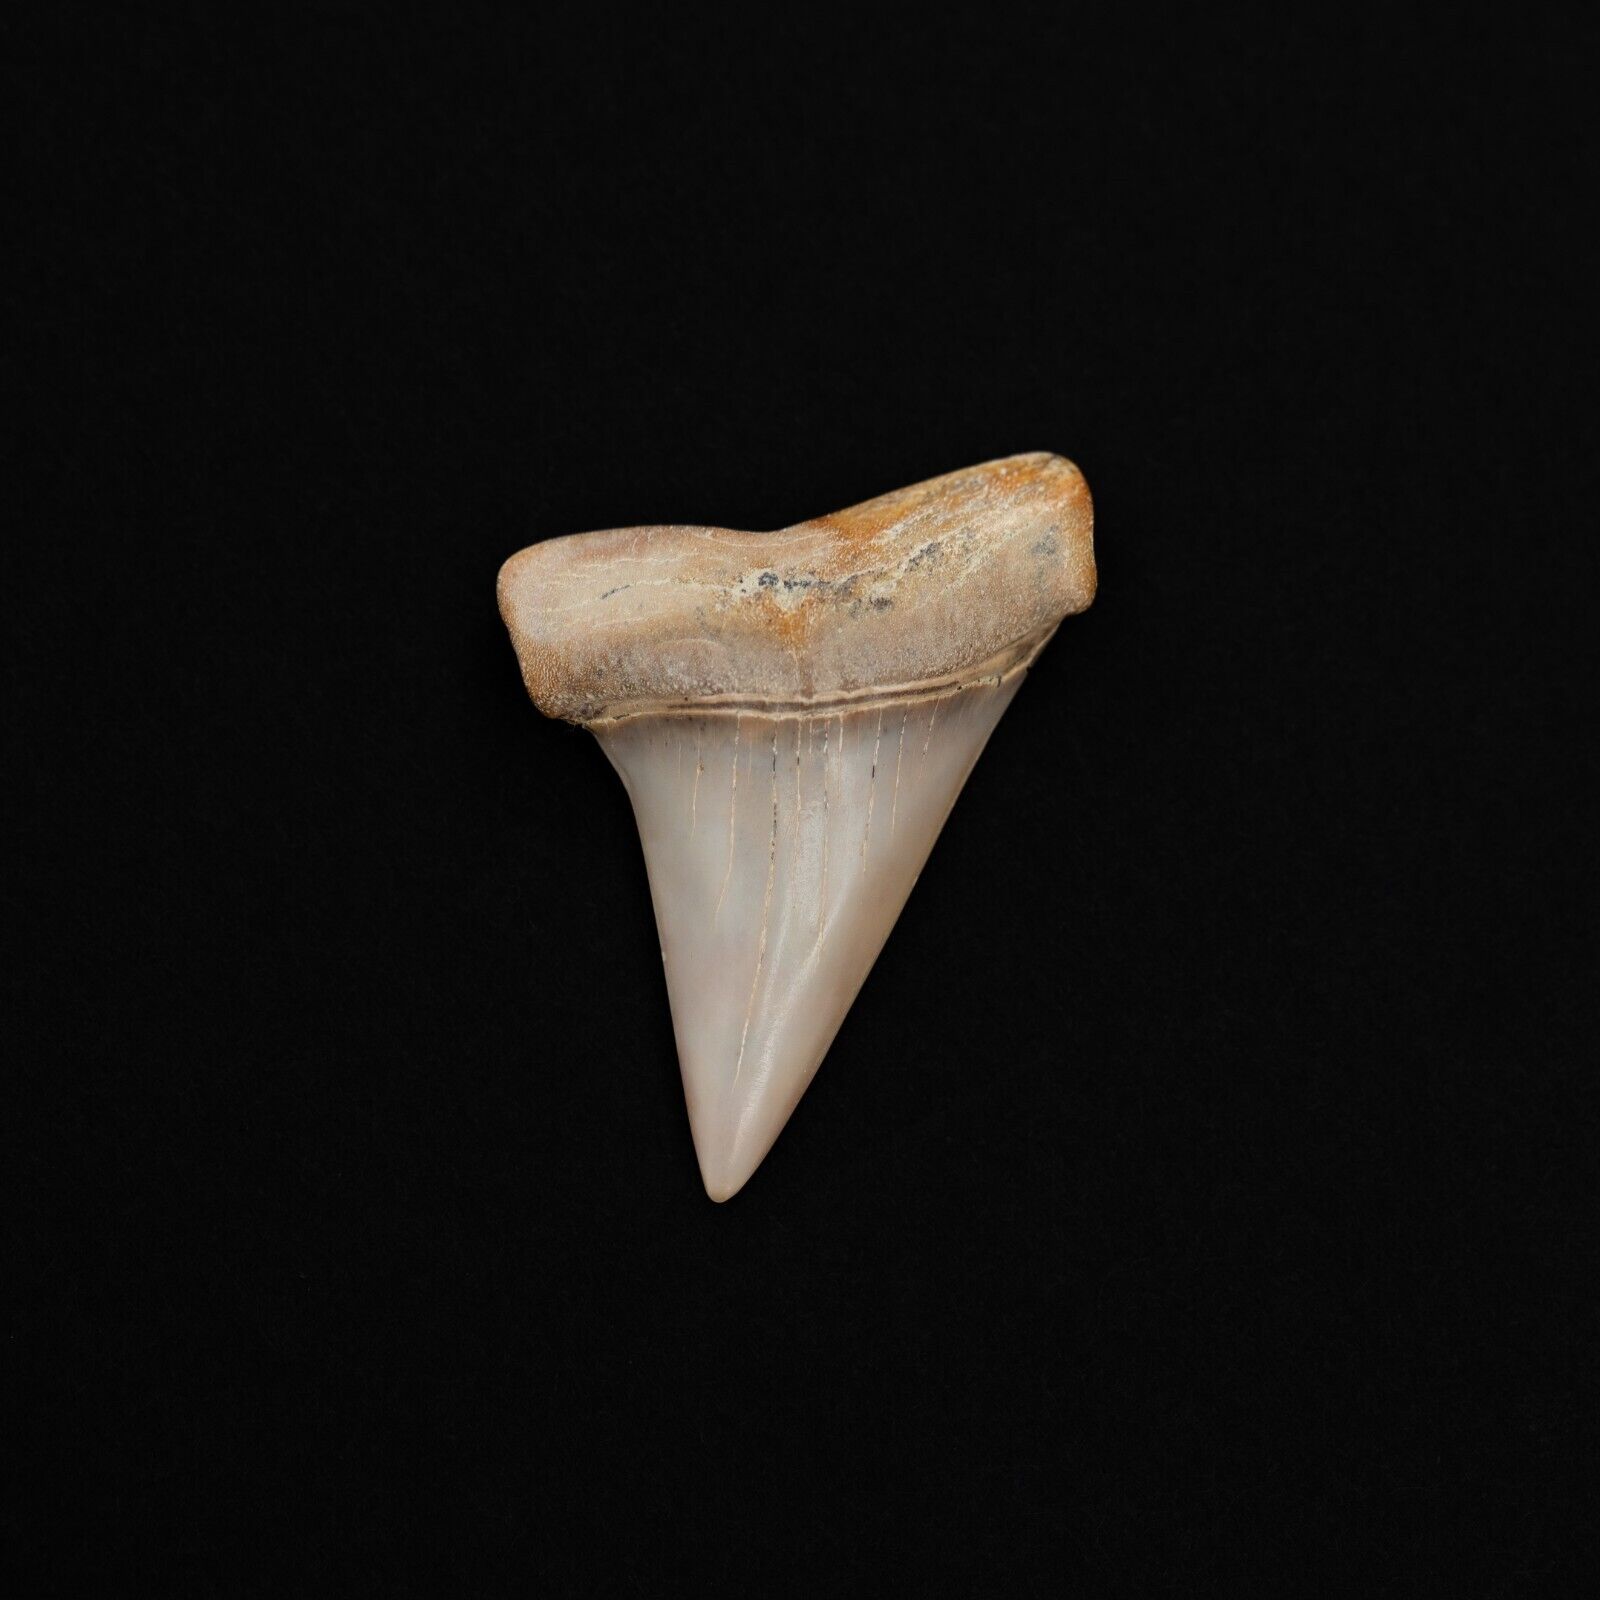 Authentic Hastalis Bakersfield Shark Tooth Fossil